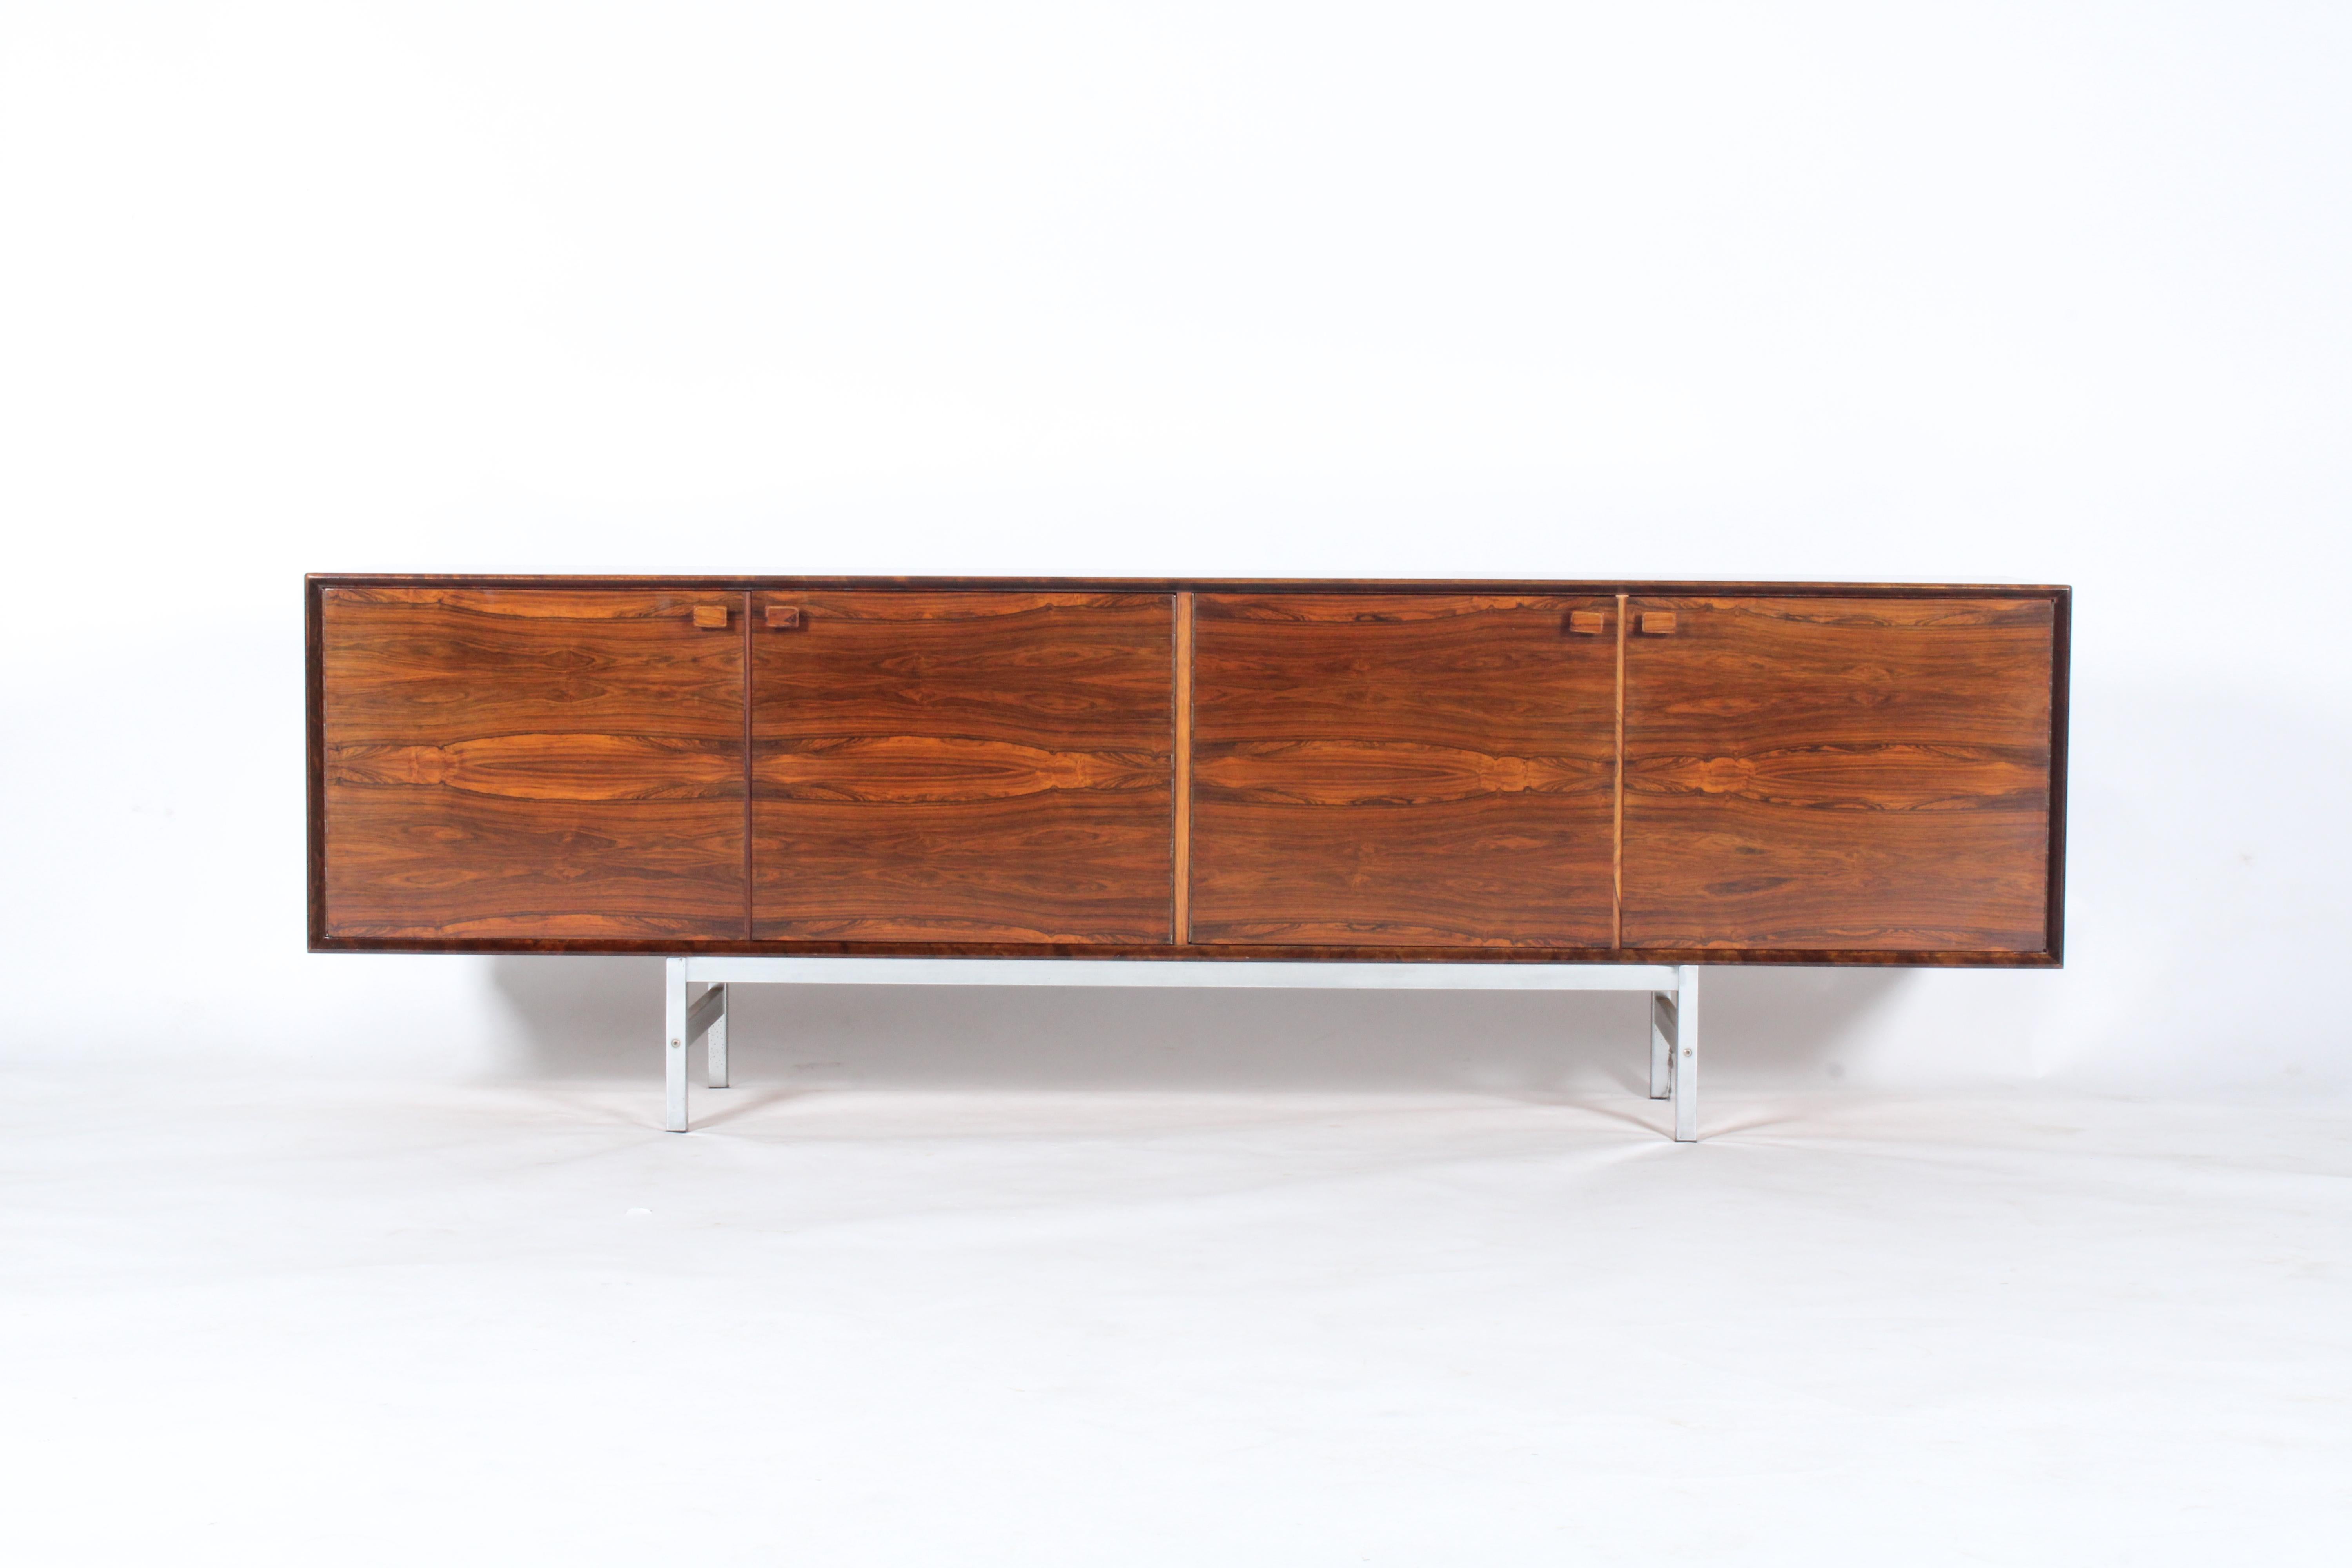 What can only be described as a Scandinavian masterpiece, sideboards simply don’t come any better. The beauty of this piece lies in its simplicity of design with beautiful clean lines and truly amazing rosewood grain pattern. Set upon a stainless